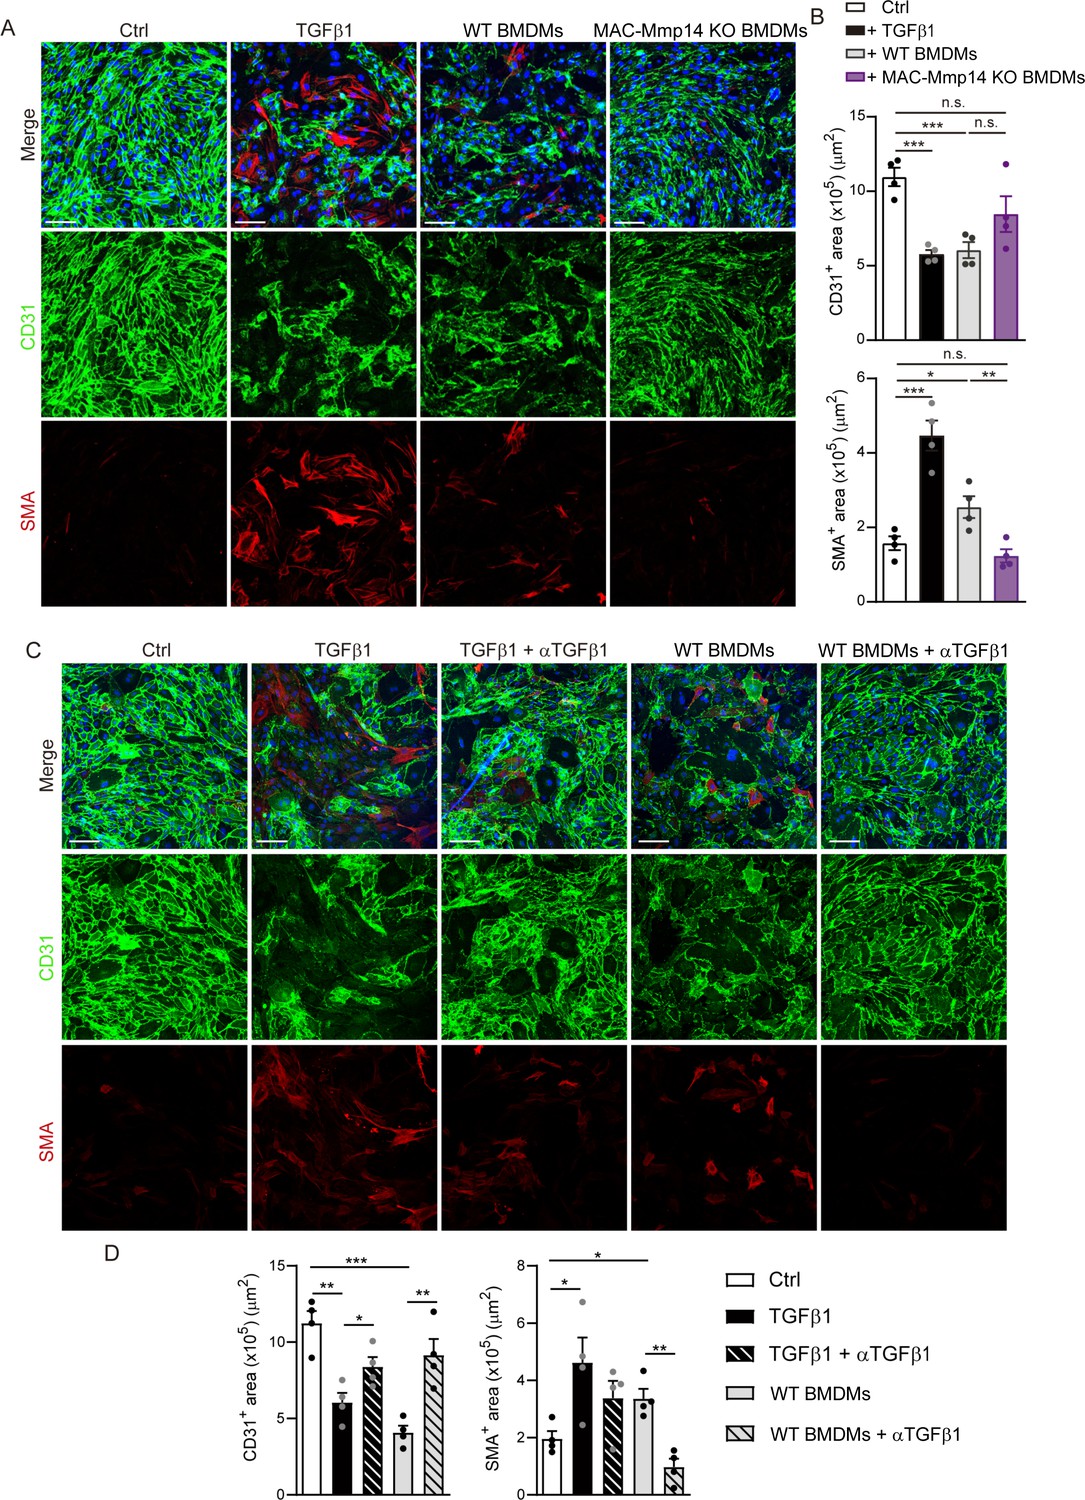 Macrophages Promote Endothelial To Mesenchymal Transition Via Mt1 Mmp Tgfb1 After Myocardial Infarction Elife